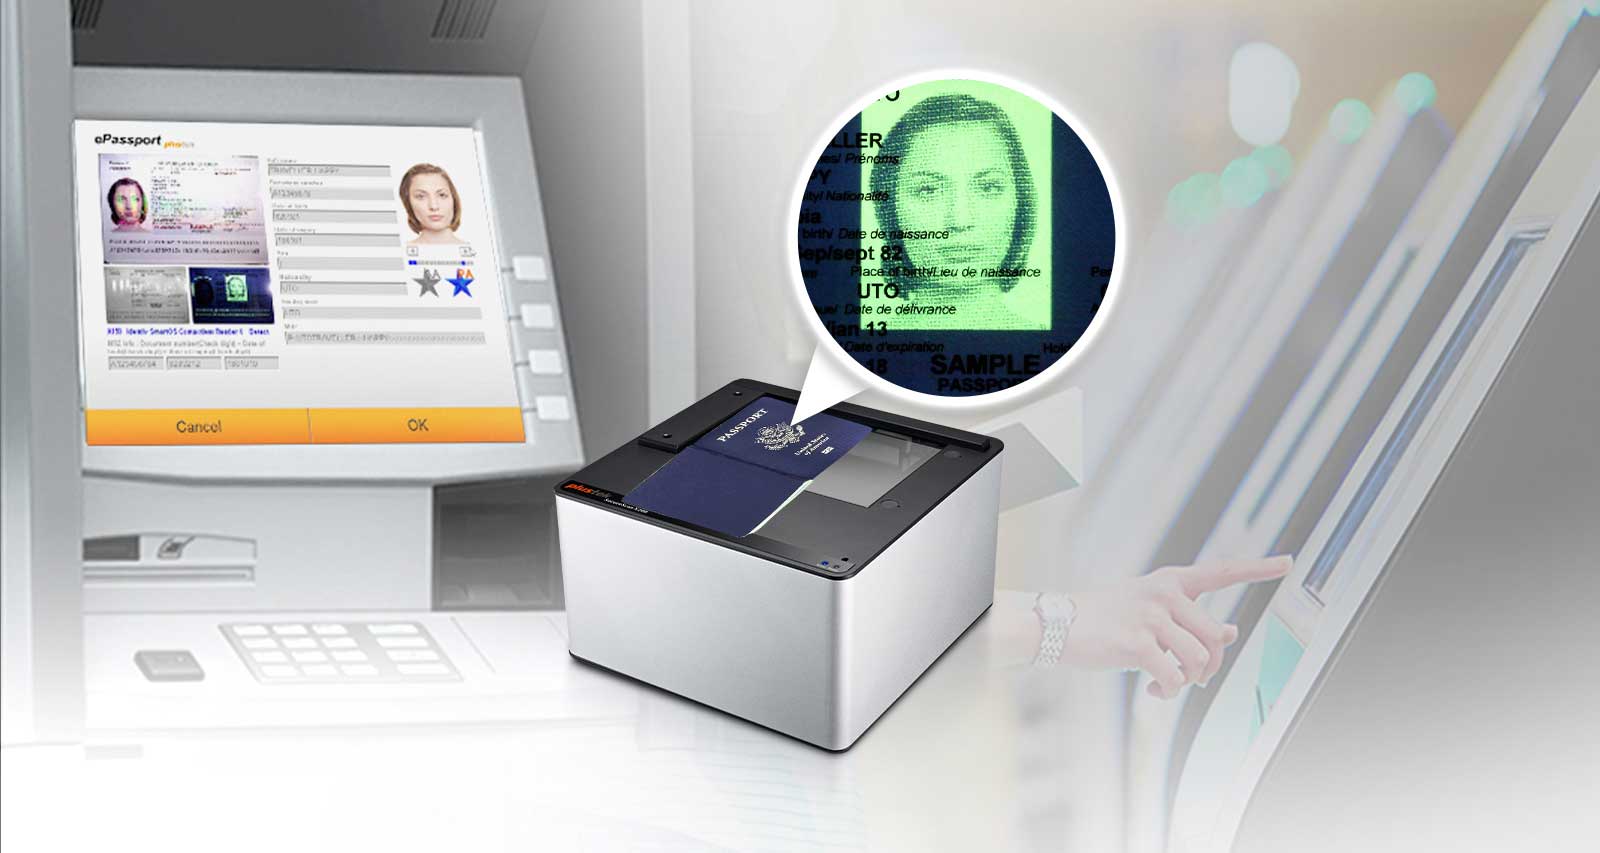 The SecureScan X200 is ideal for integration into automatic border security kioksks, e-Gates, etc.